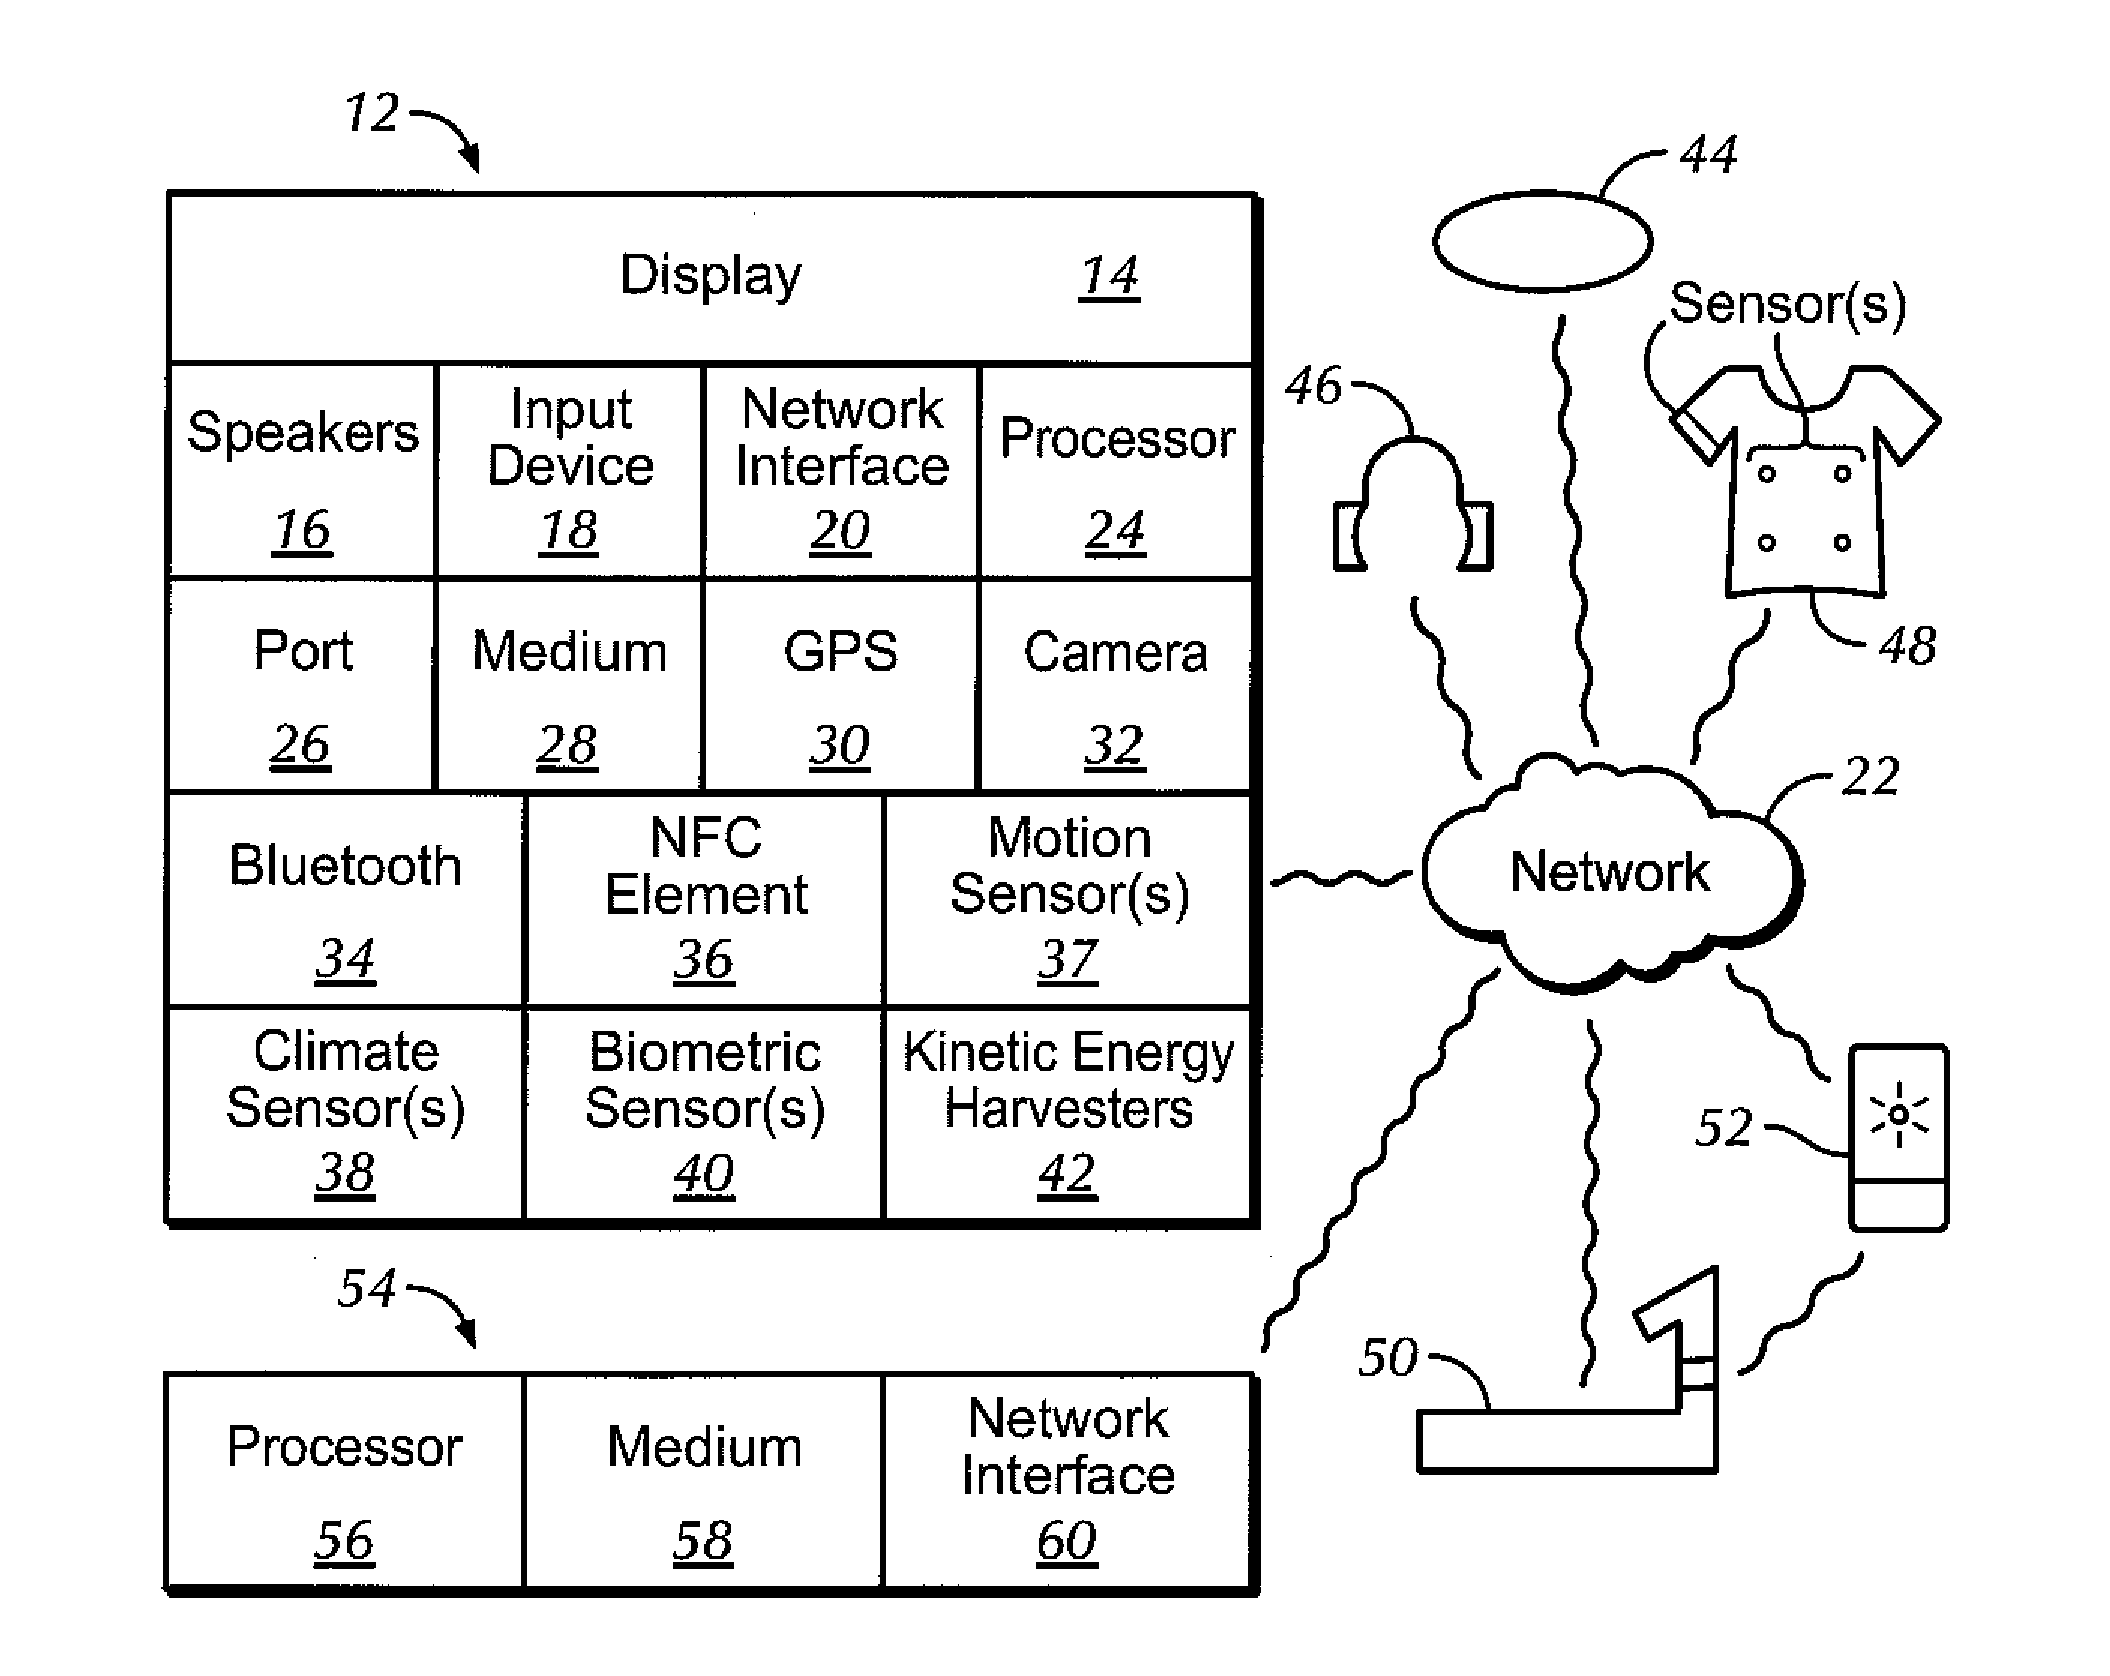 Altering exercise routes based on device determined information